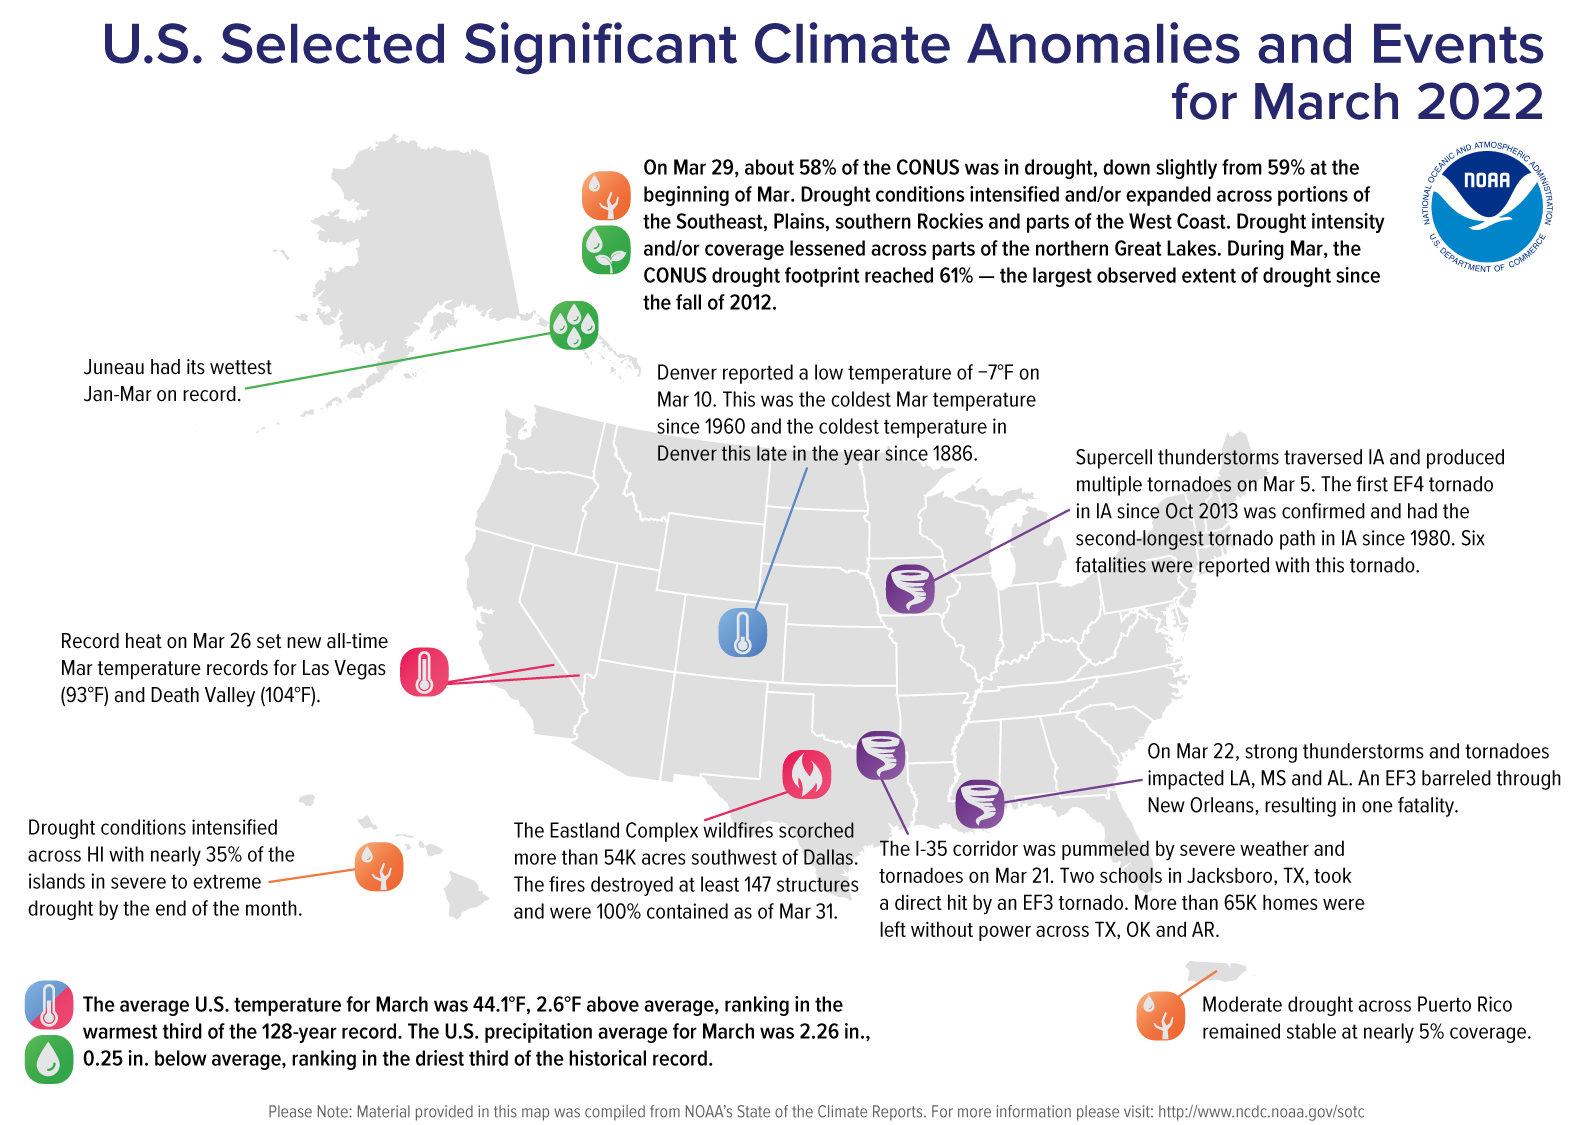 A map of the United States plotted with significant climate events that occurred during March 2022. Please see the story below as well as the full climate report highlights at http://bit.ly/USClimate202203.